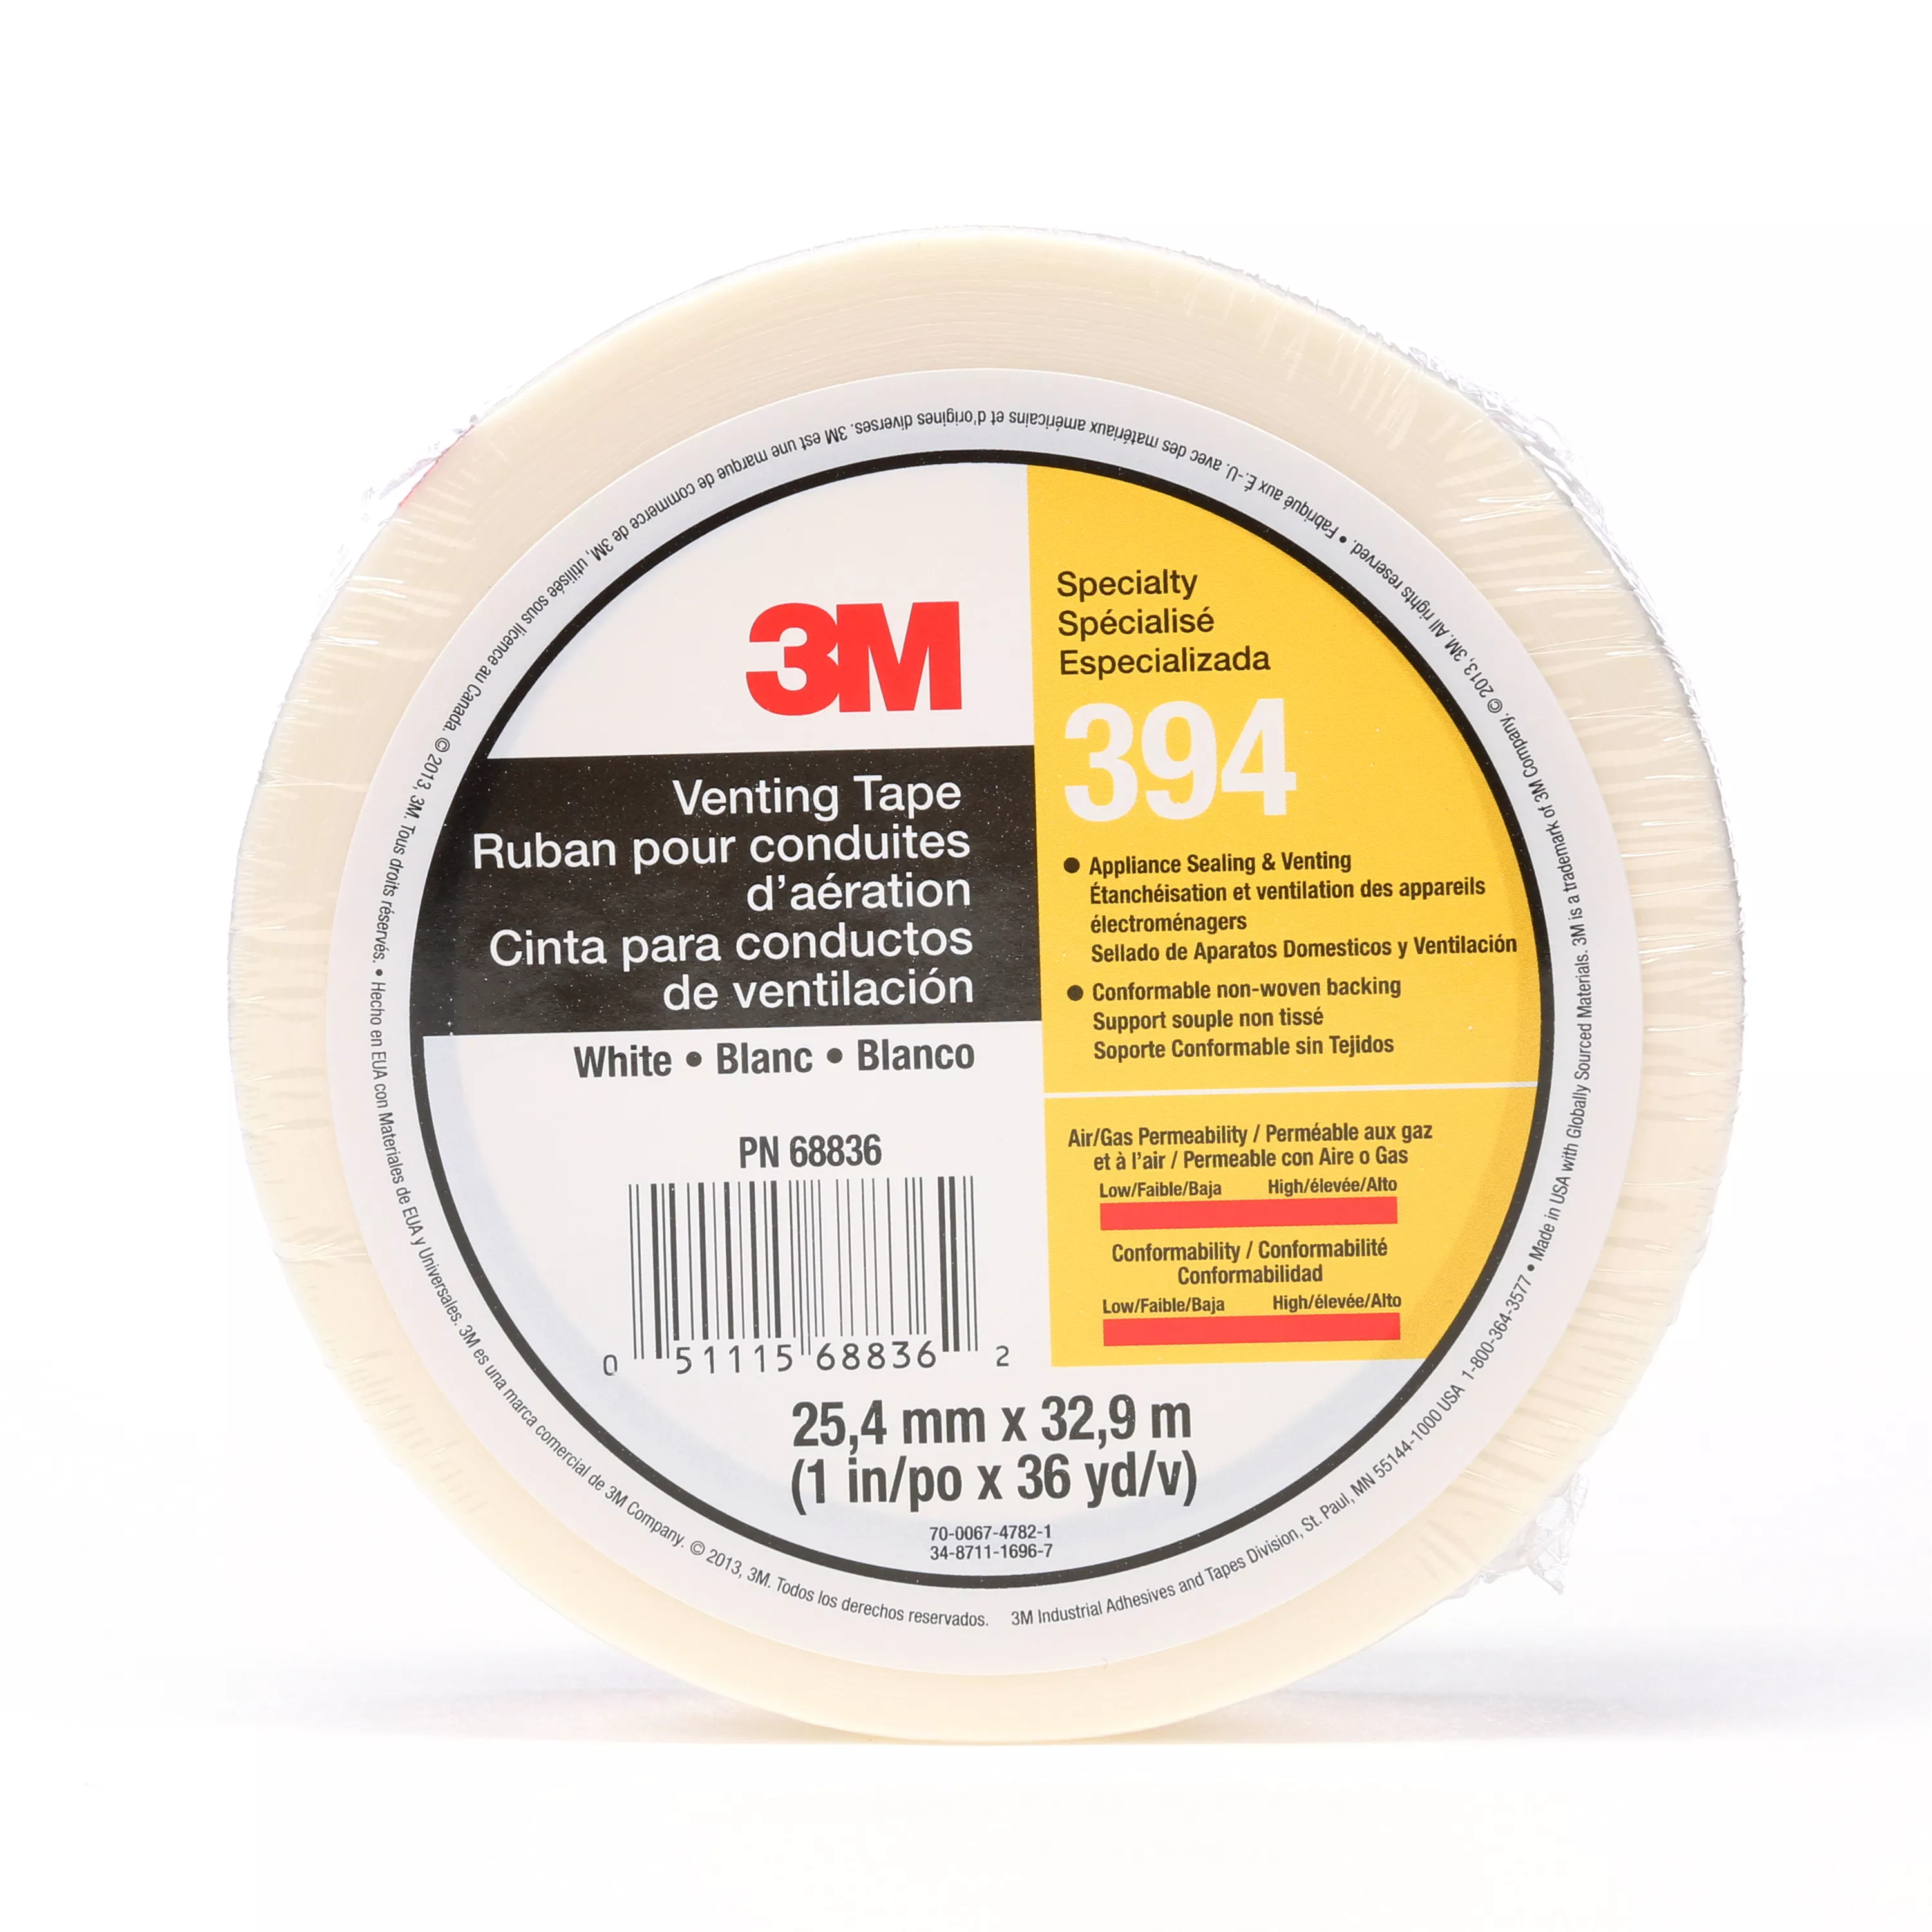 3M™ Vent Tape 394, White, 1 in x 36 yd, 4 mil, 36 Roll/Case,
Individually Wrapped Conveniently Packaged